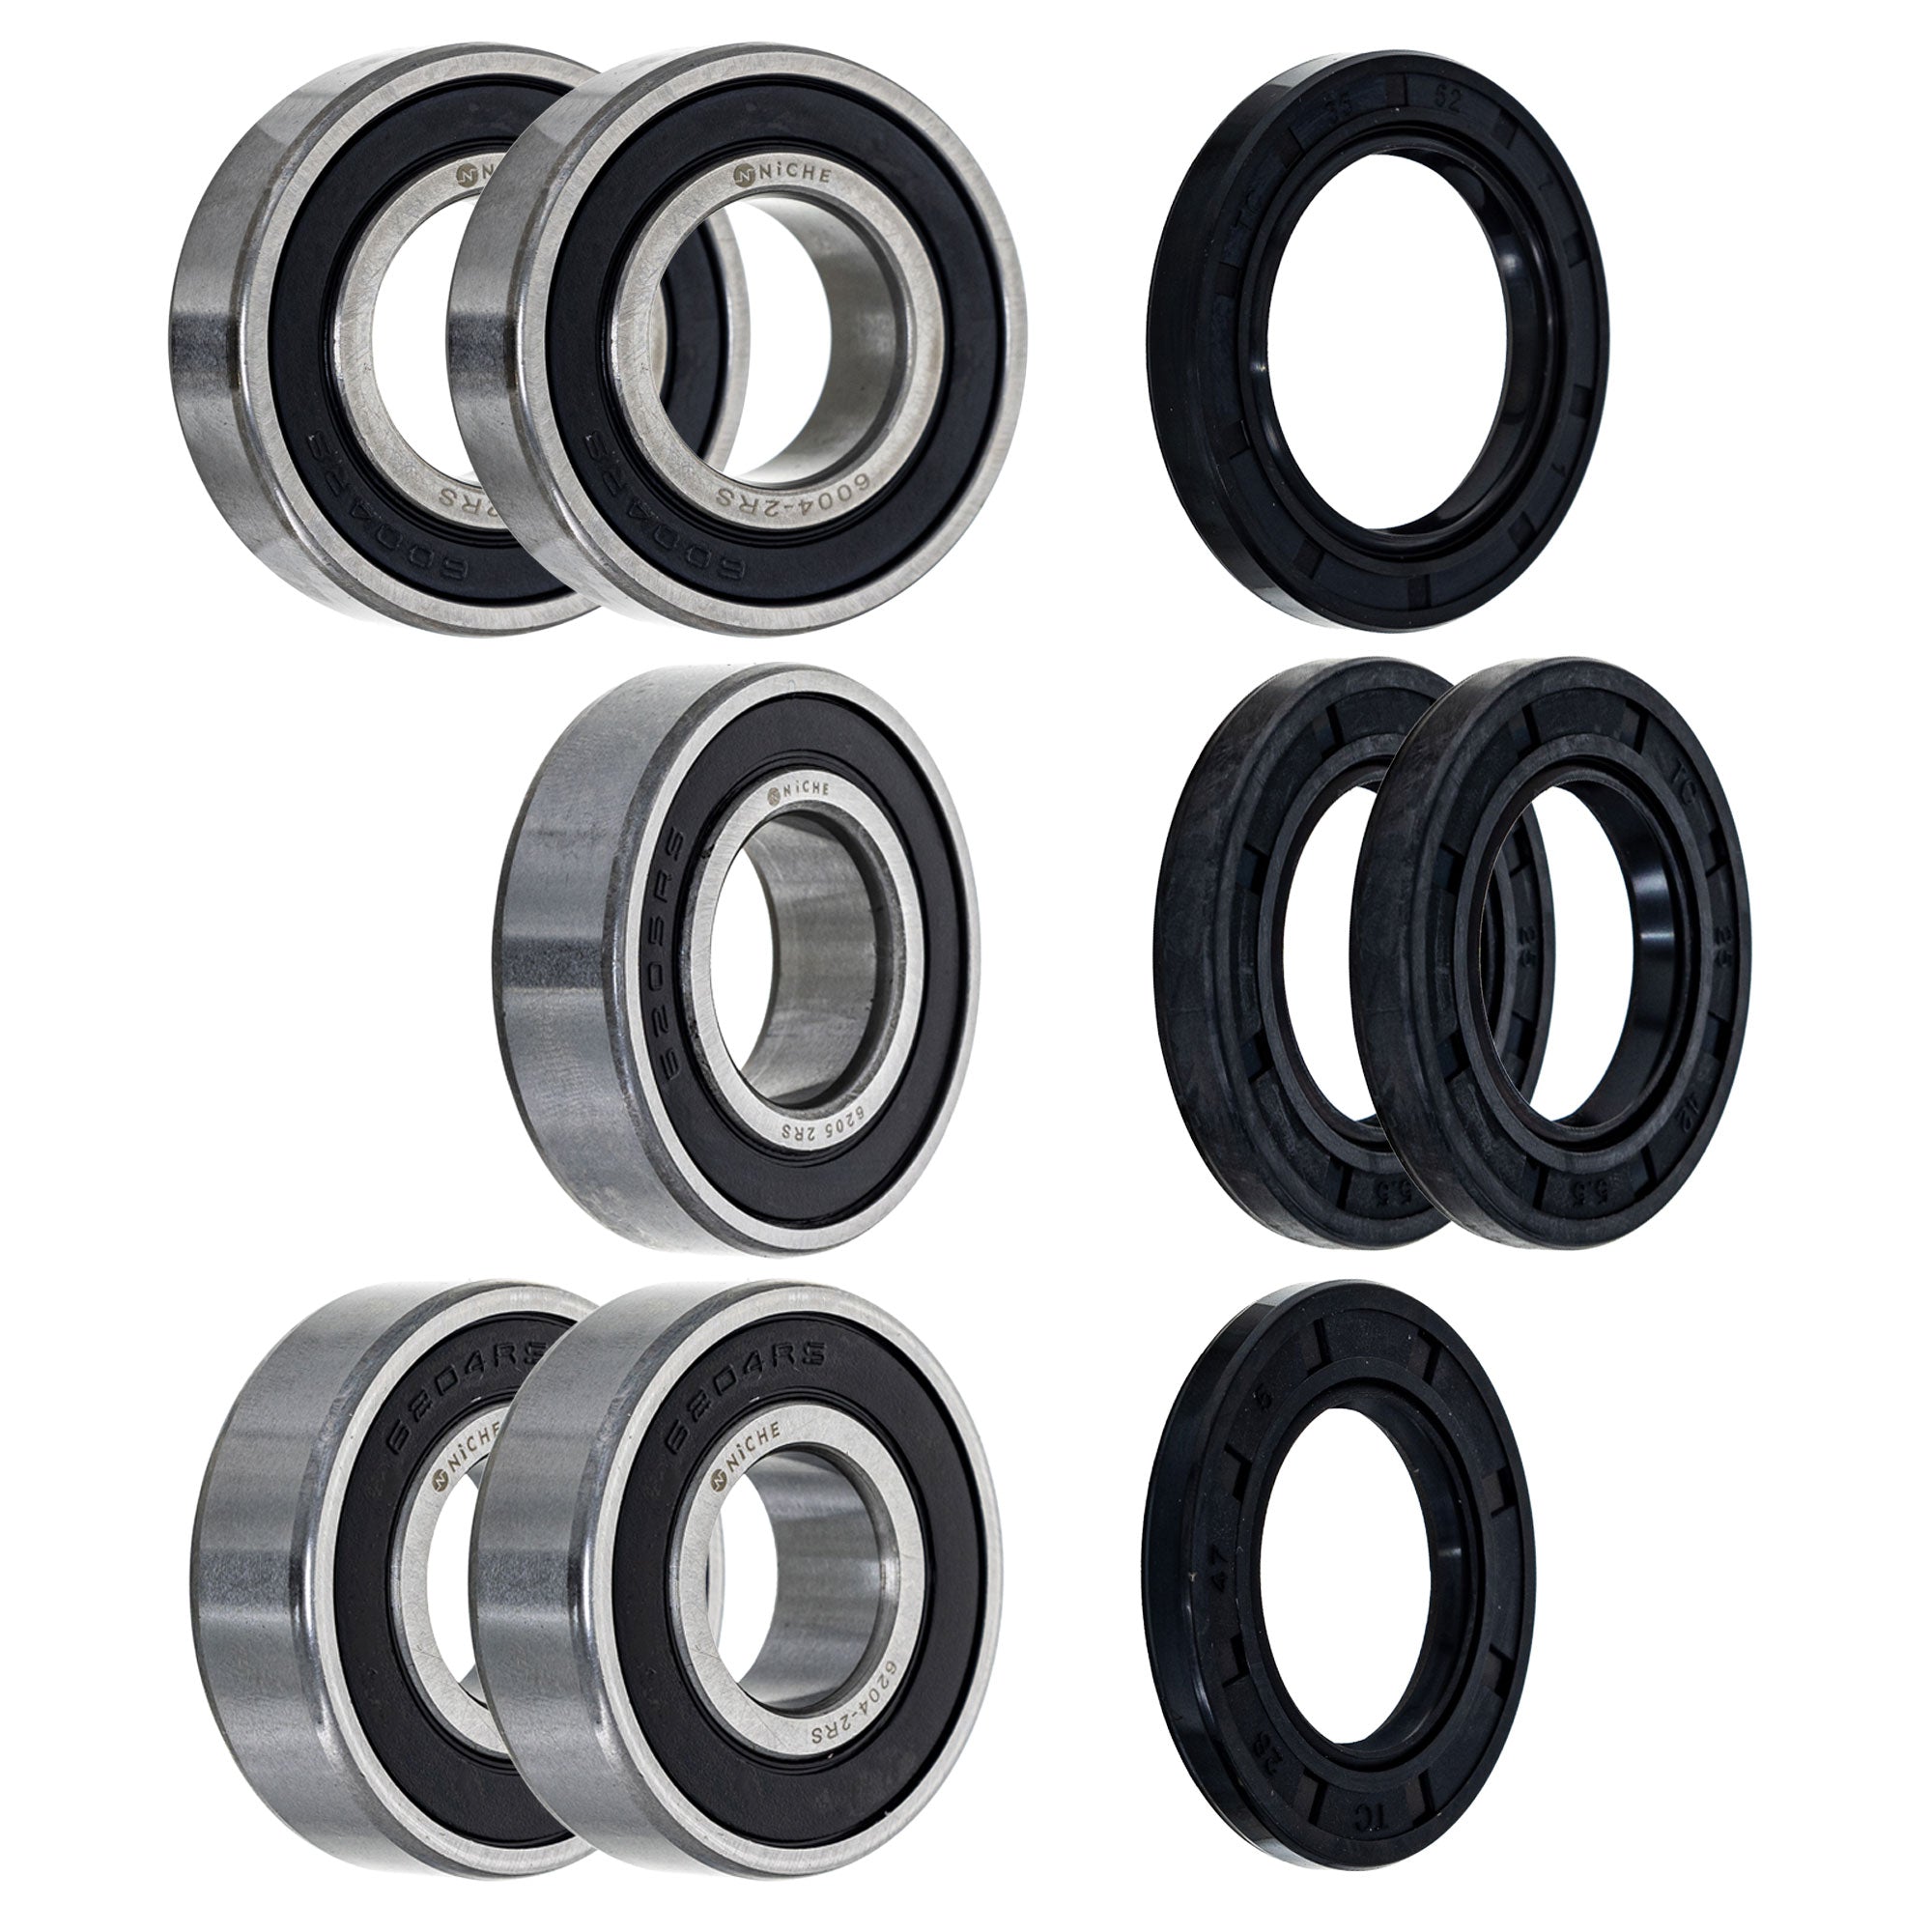 Wheel Bearing Seal Kit for zOTHER Ref No Z750S NICHE MK1008551